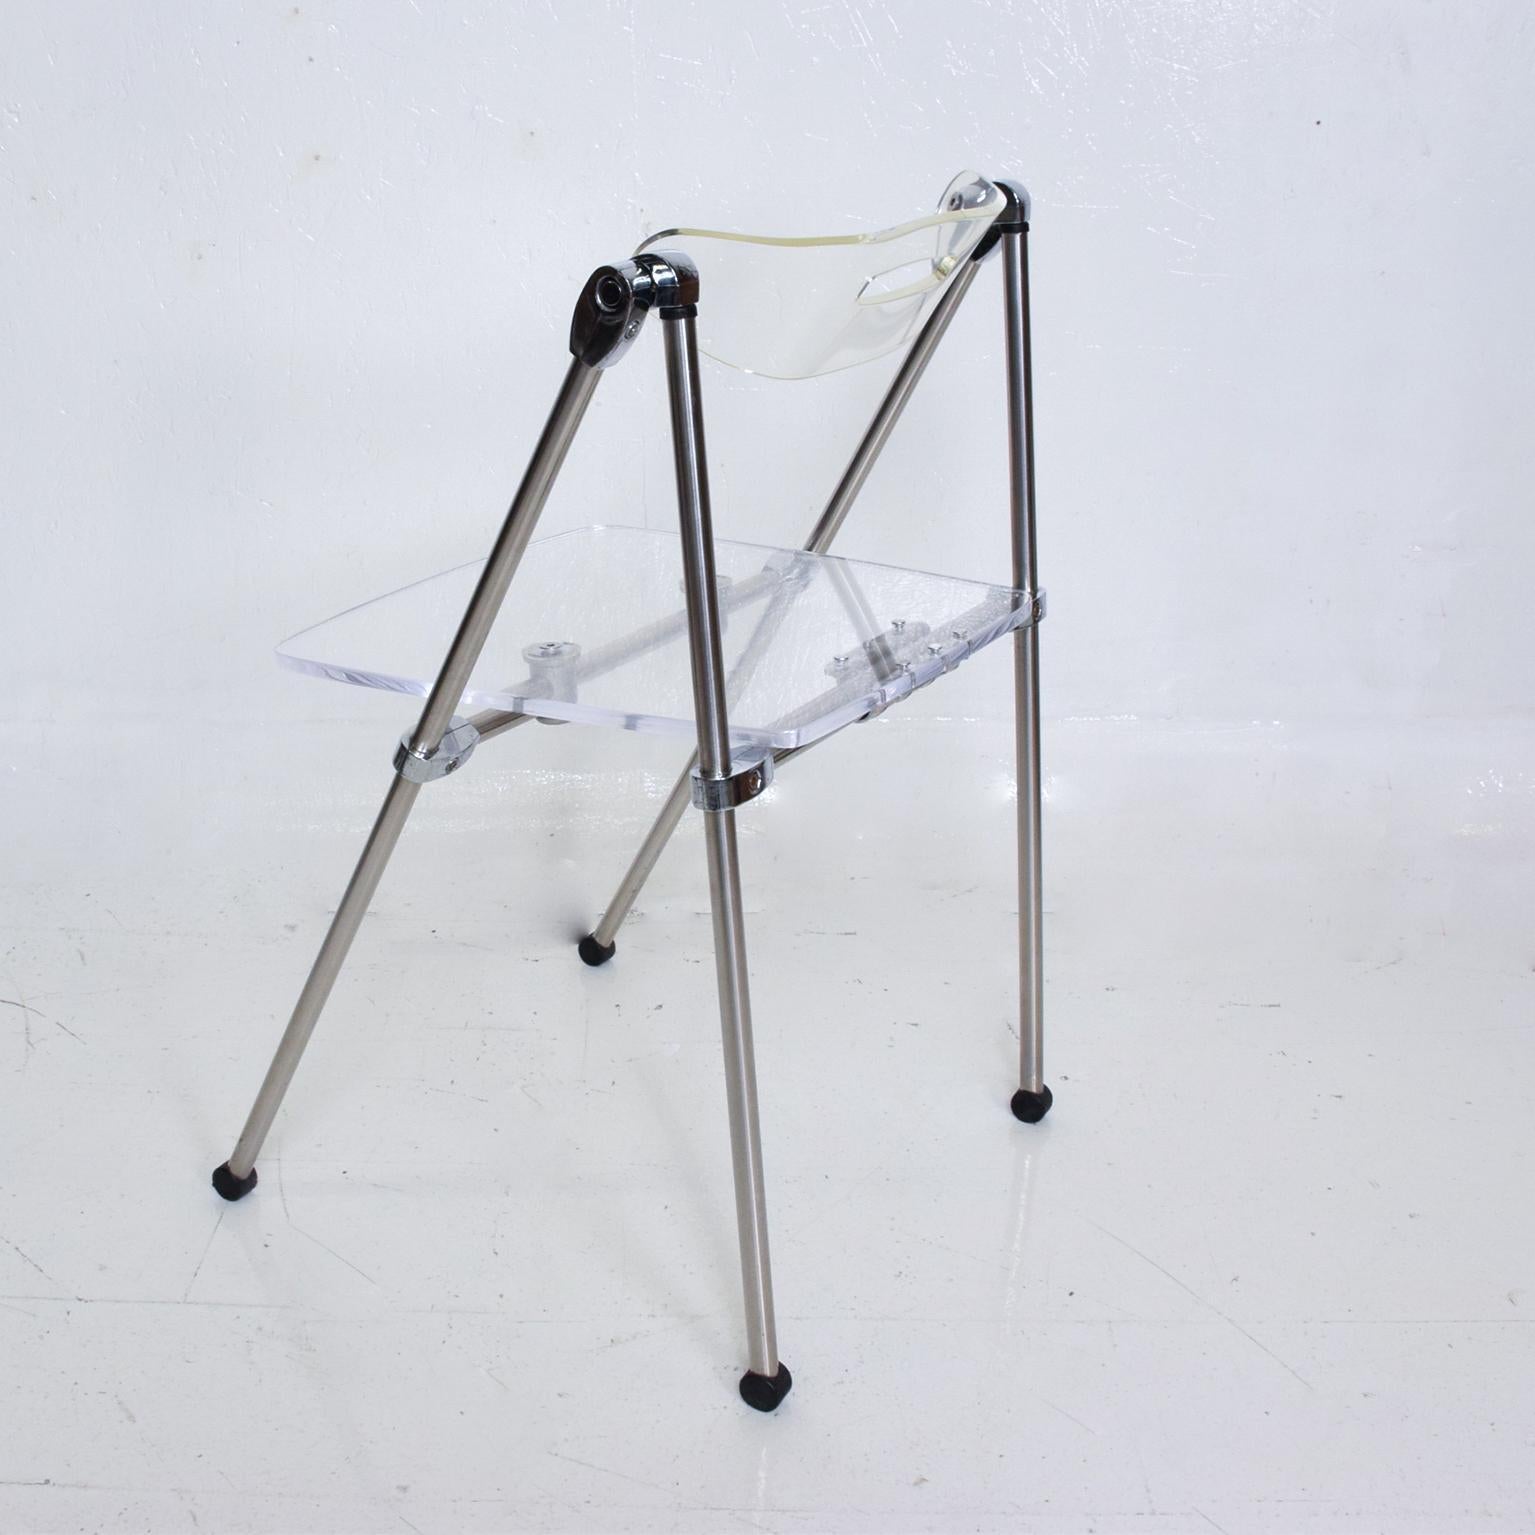 For your consideration, a single occasional Lucite Chair, After Giancarlo Piretti, Castelli. The Original seat was replaced with a new lucite seat and aluminum support. Backrest has a stress fracture. Refer to images. No label present from the